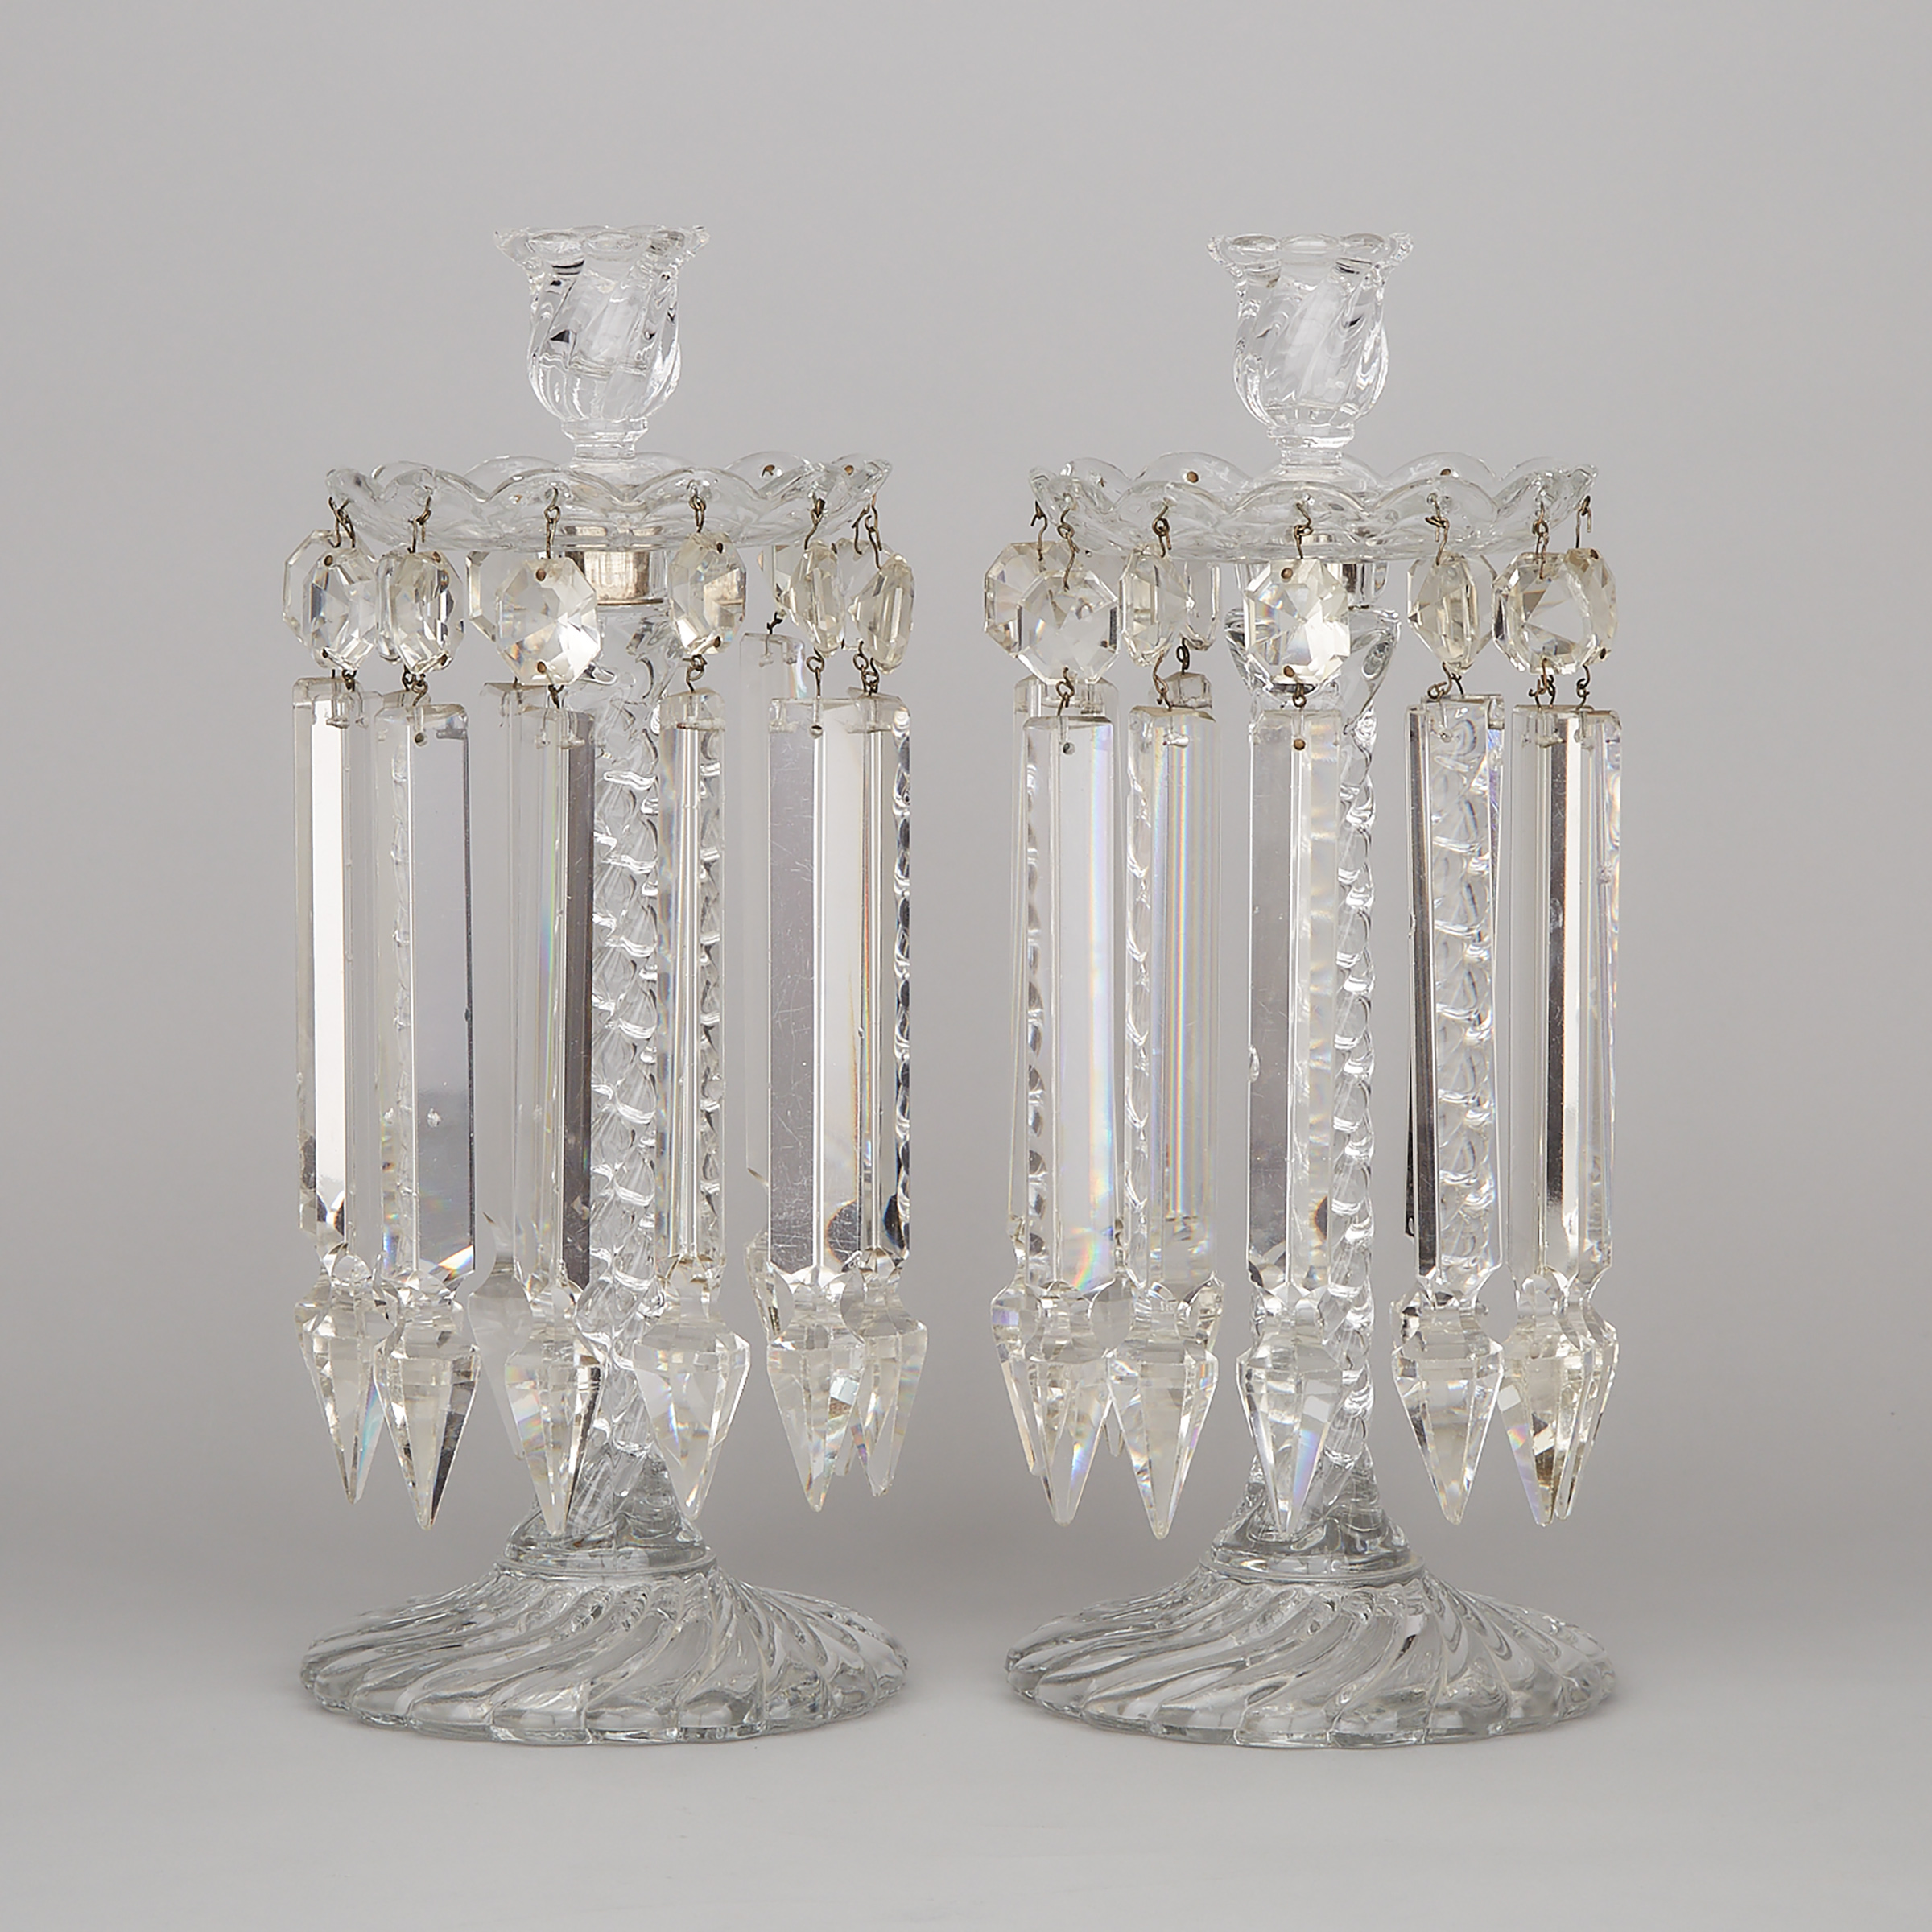 Pair of French Moulded Glass Lustre Candlesticks, late 19th century